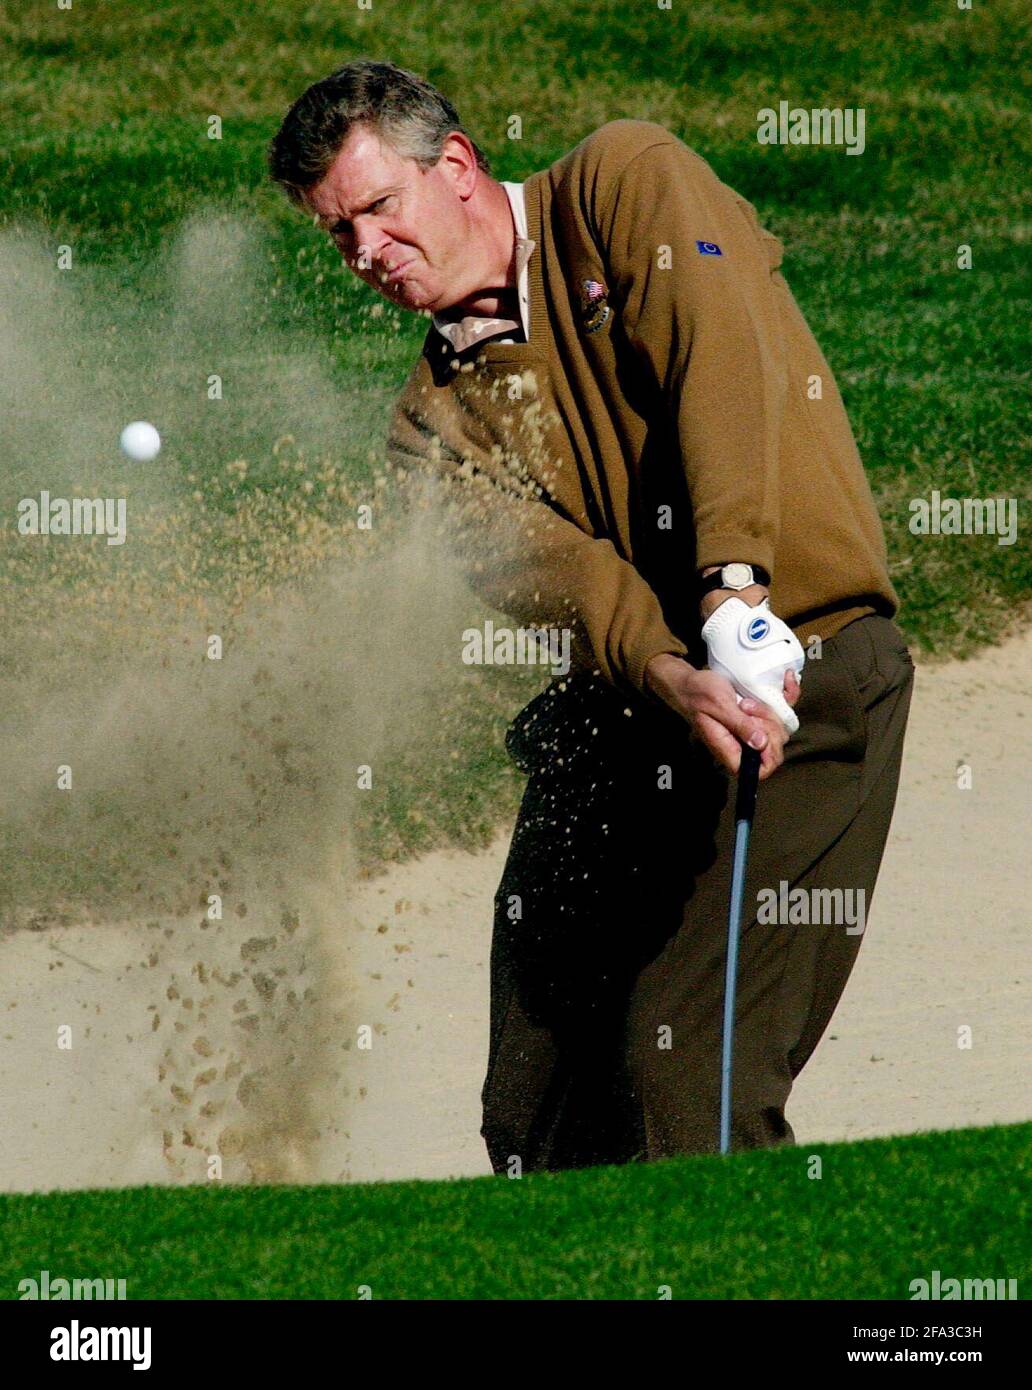 RYDER CUP 2002 AT THE BELFRY 25/9/2002 MONTY BUNKER BY THE 15 TH GREEN PICTURE DAVID ASHDOWN.RYDER CUP BELFRY 2002 Stock Photo